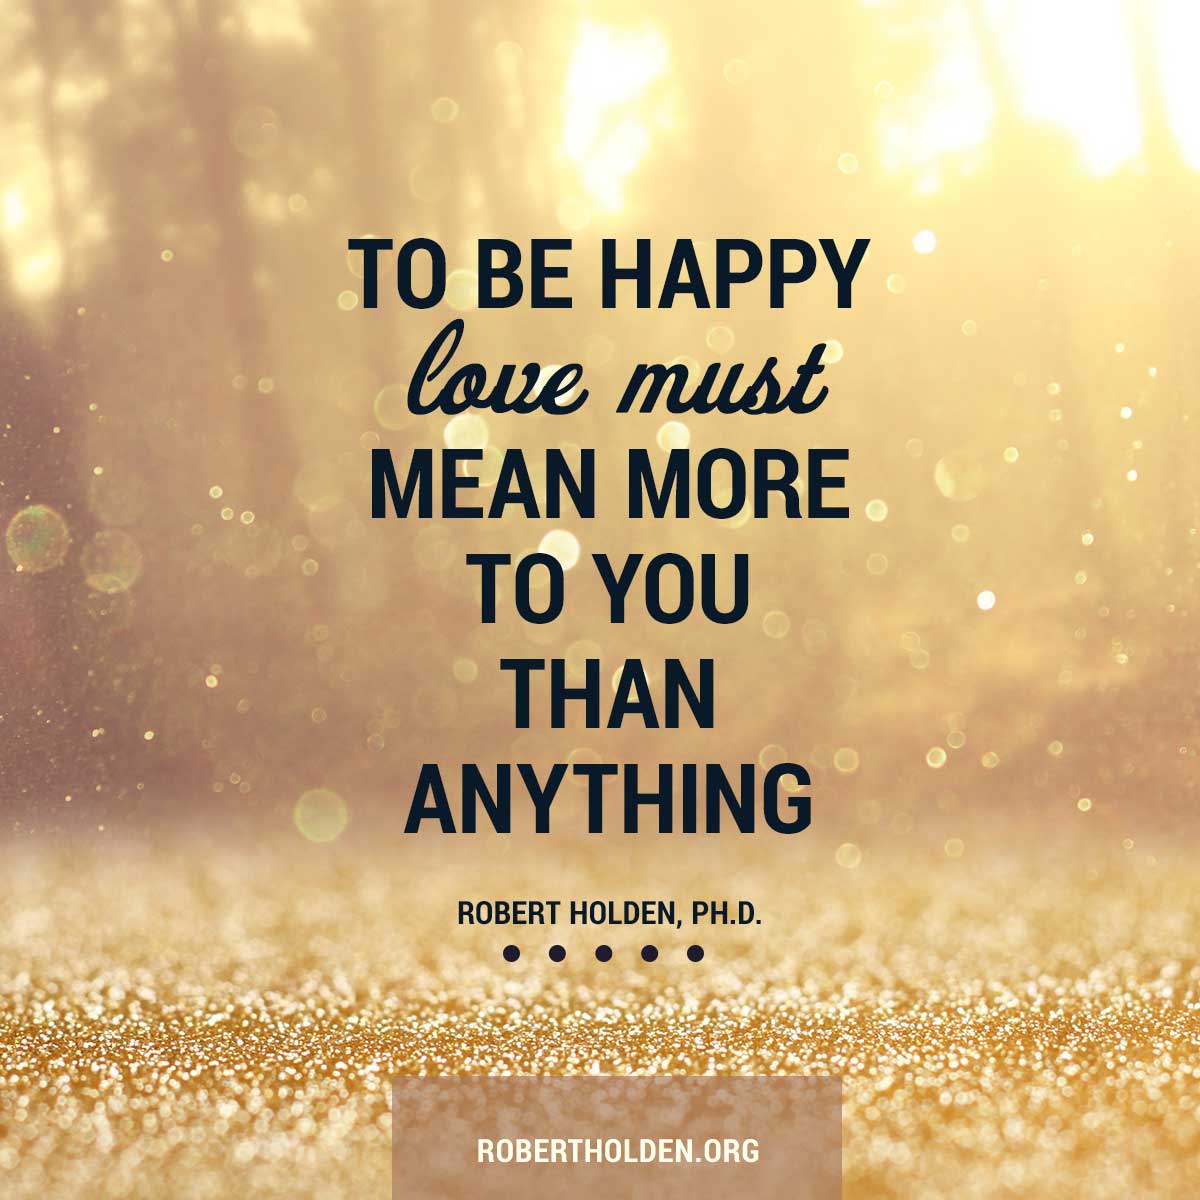 Daily Quote  Robert Holden, Ph.D.